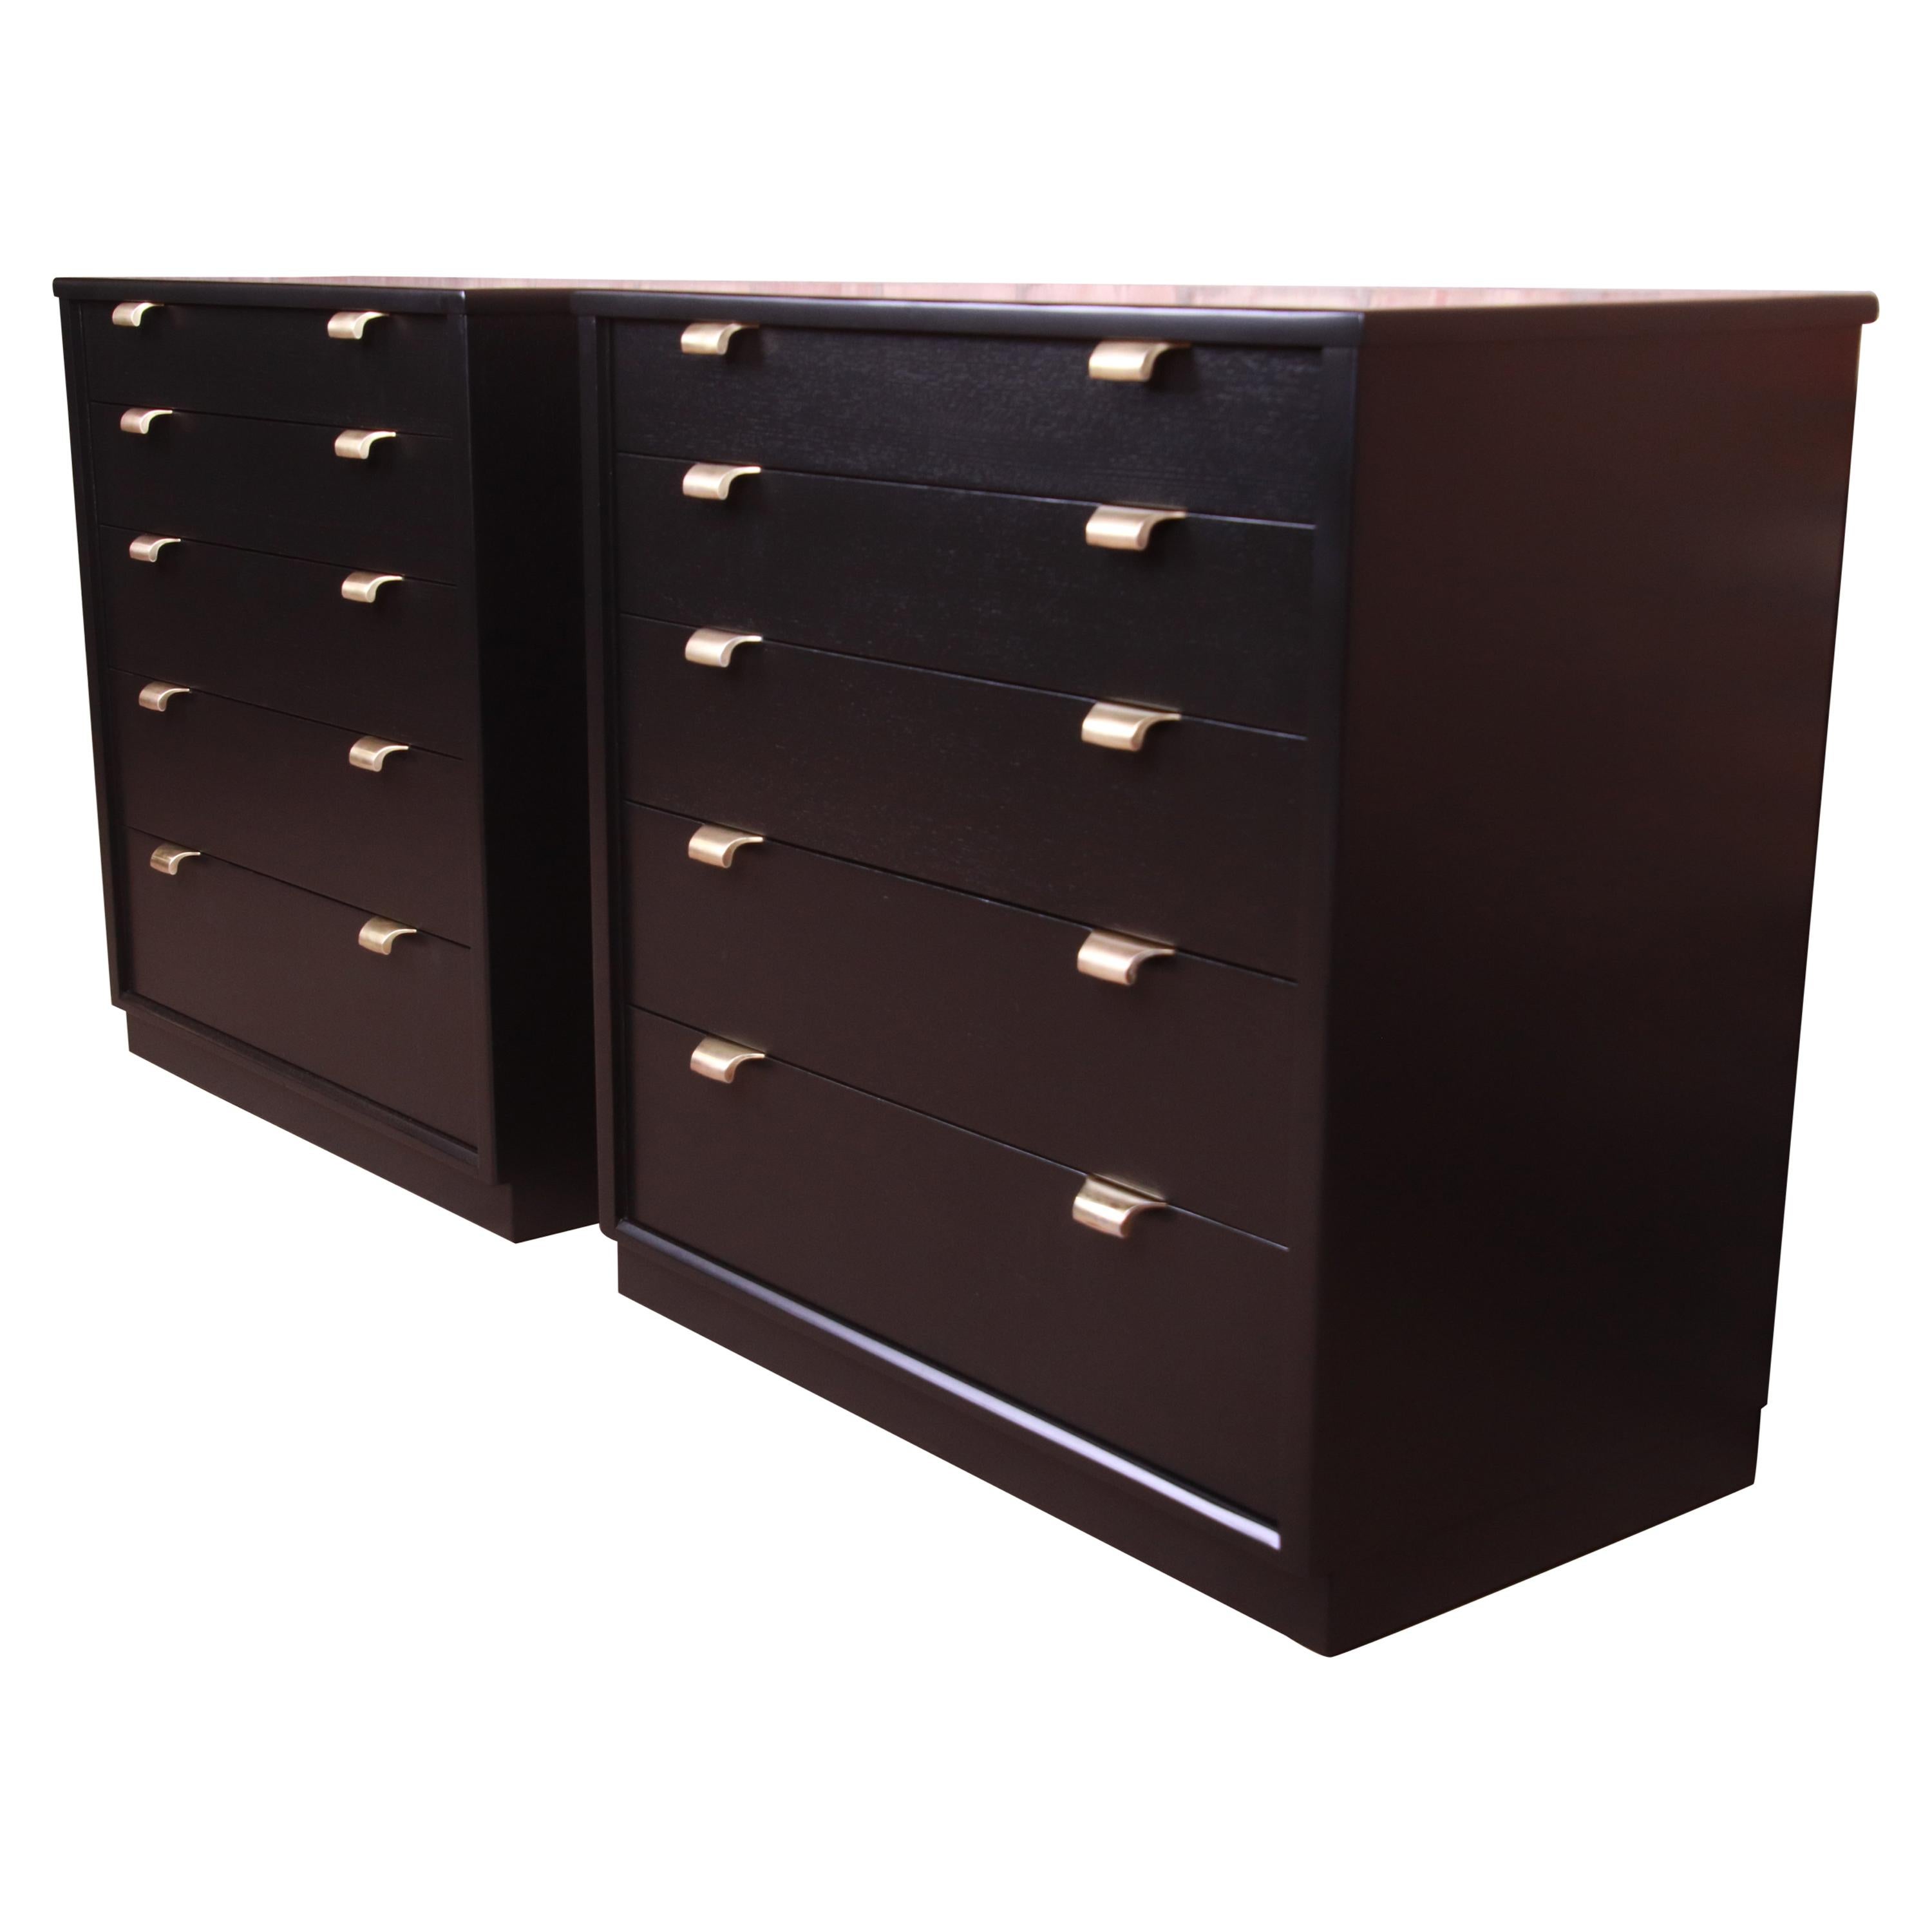 Edward Wormley for Drexel Precedent Black Lacquered Bachelor Chests, Refinished